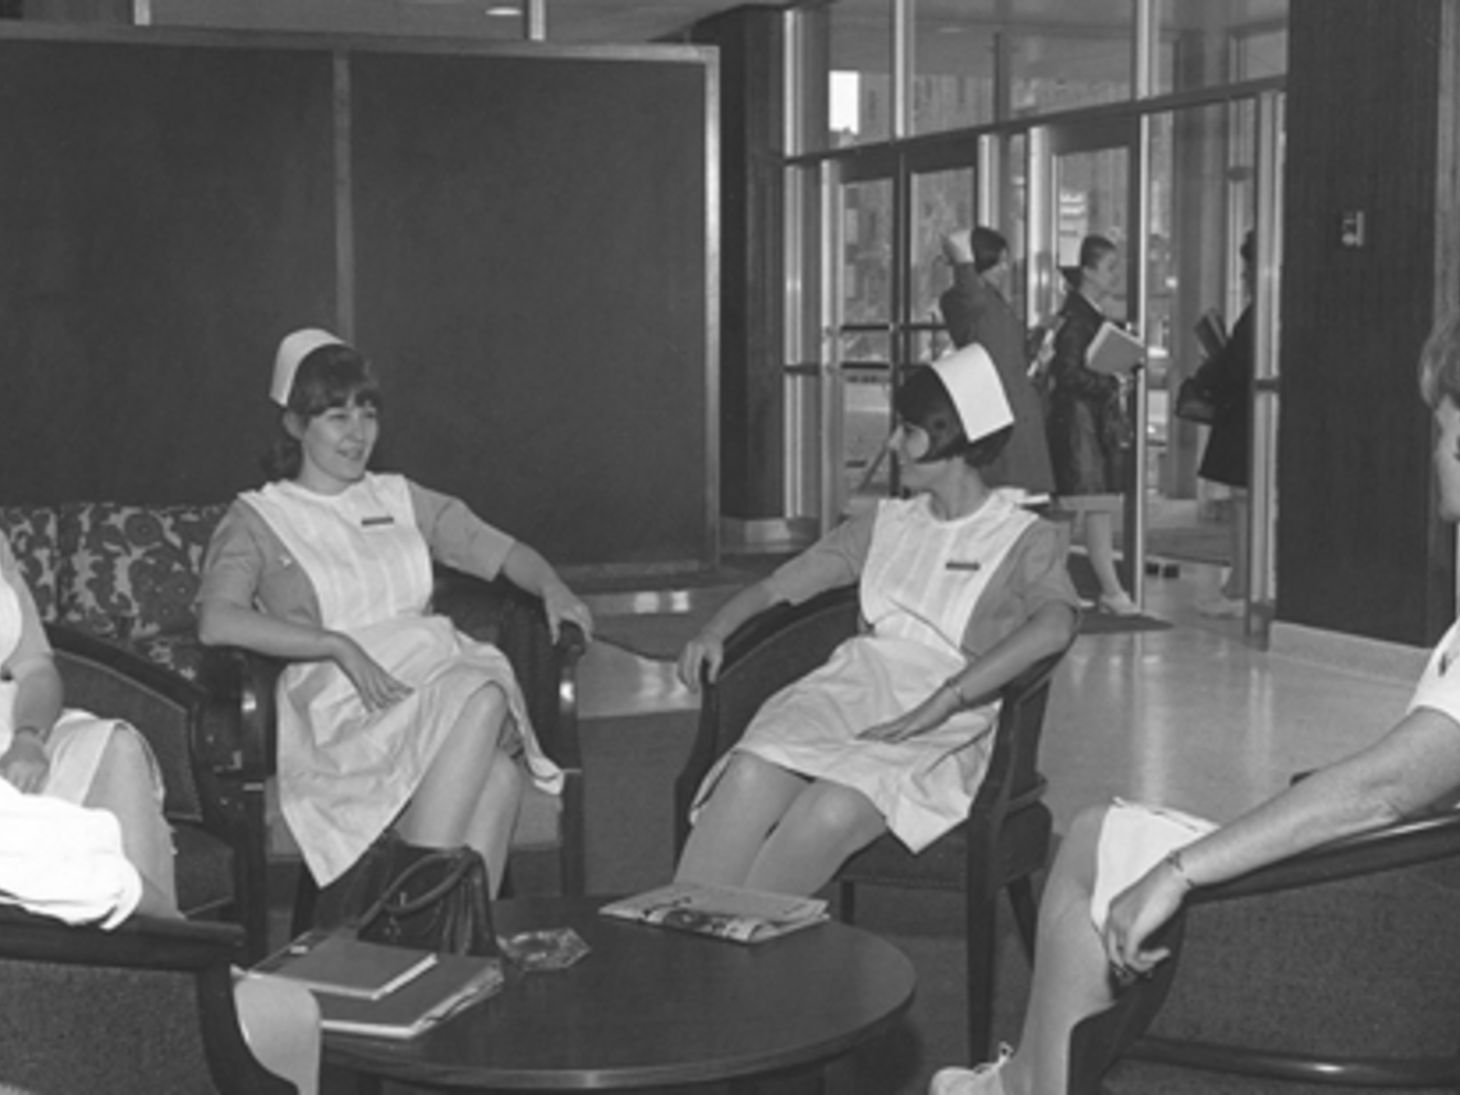 Photo taken from 1967 of OSU Nursing students talking to each other